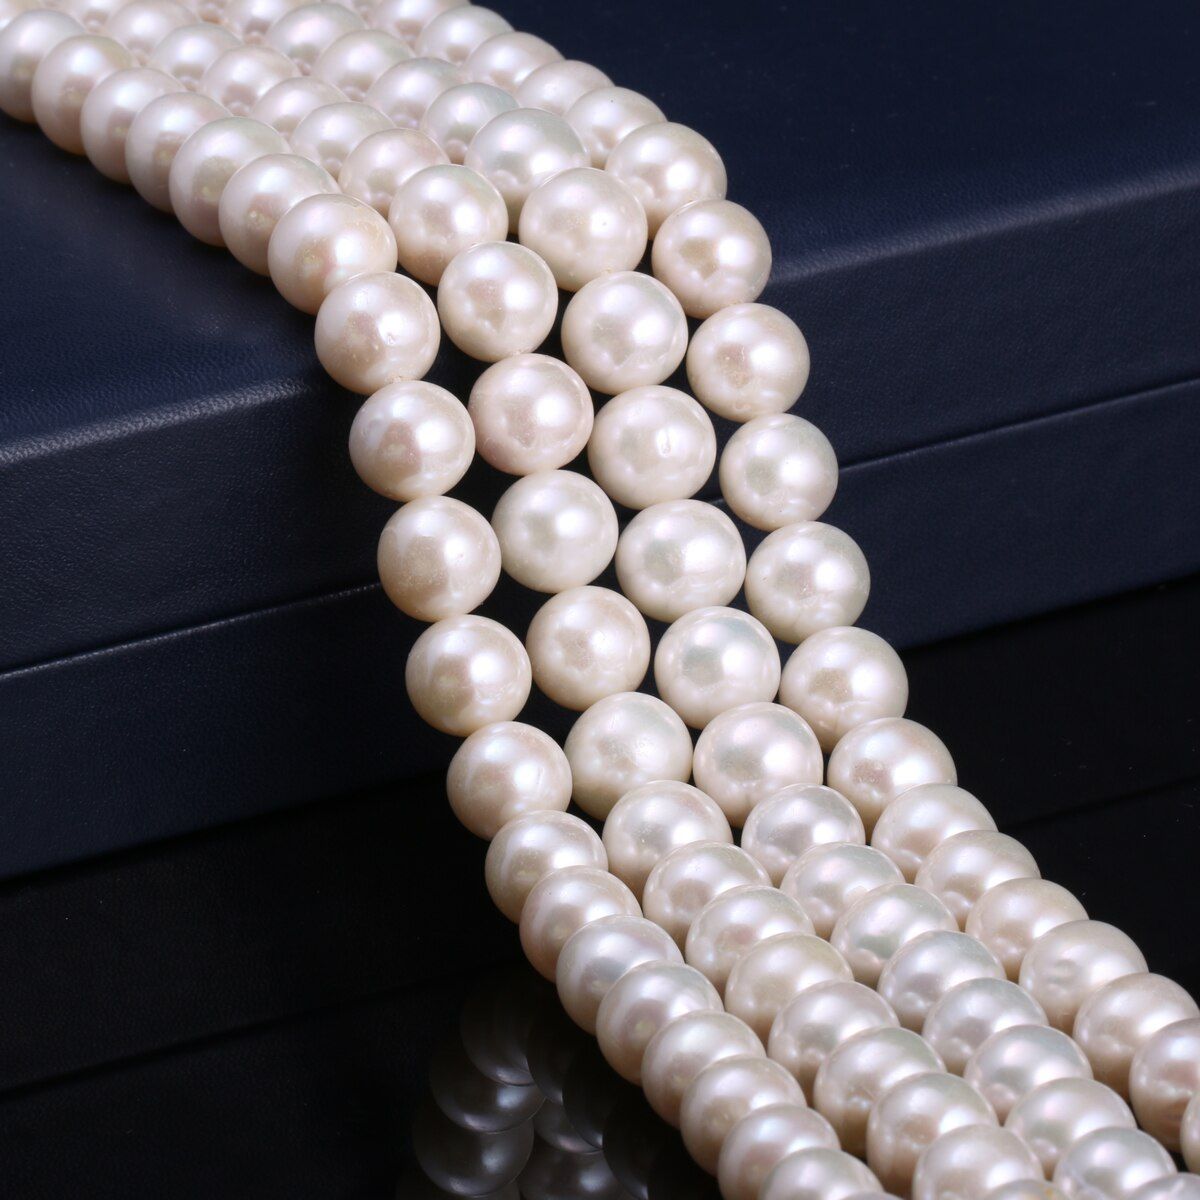 Natural New 12mm Black Round Freshwater Cultured Pearls Necklace Throughout 2019 Freshwater Cultured Pearls &amp; Beads Necklaces (View 8 of 25)